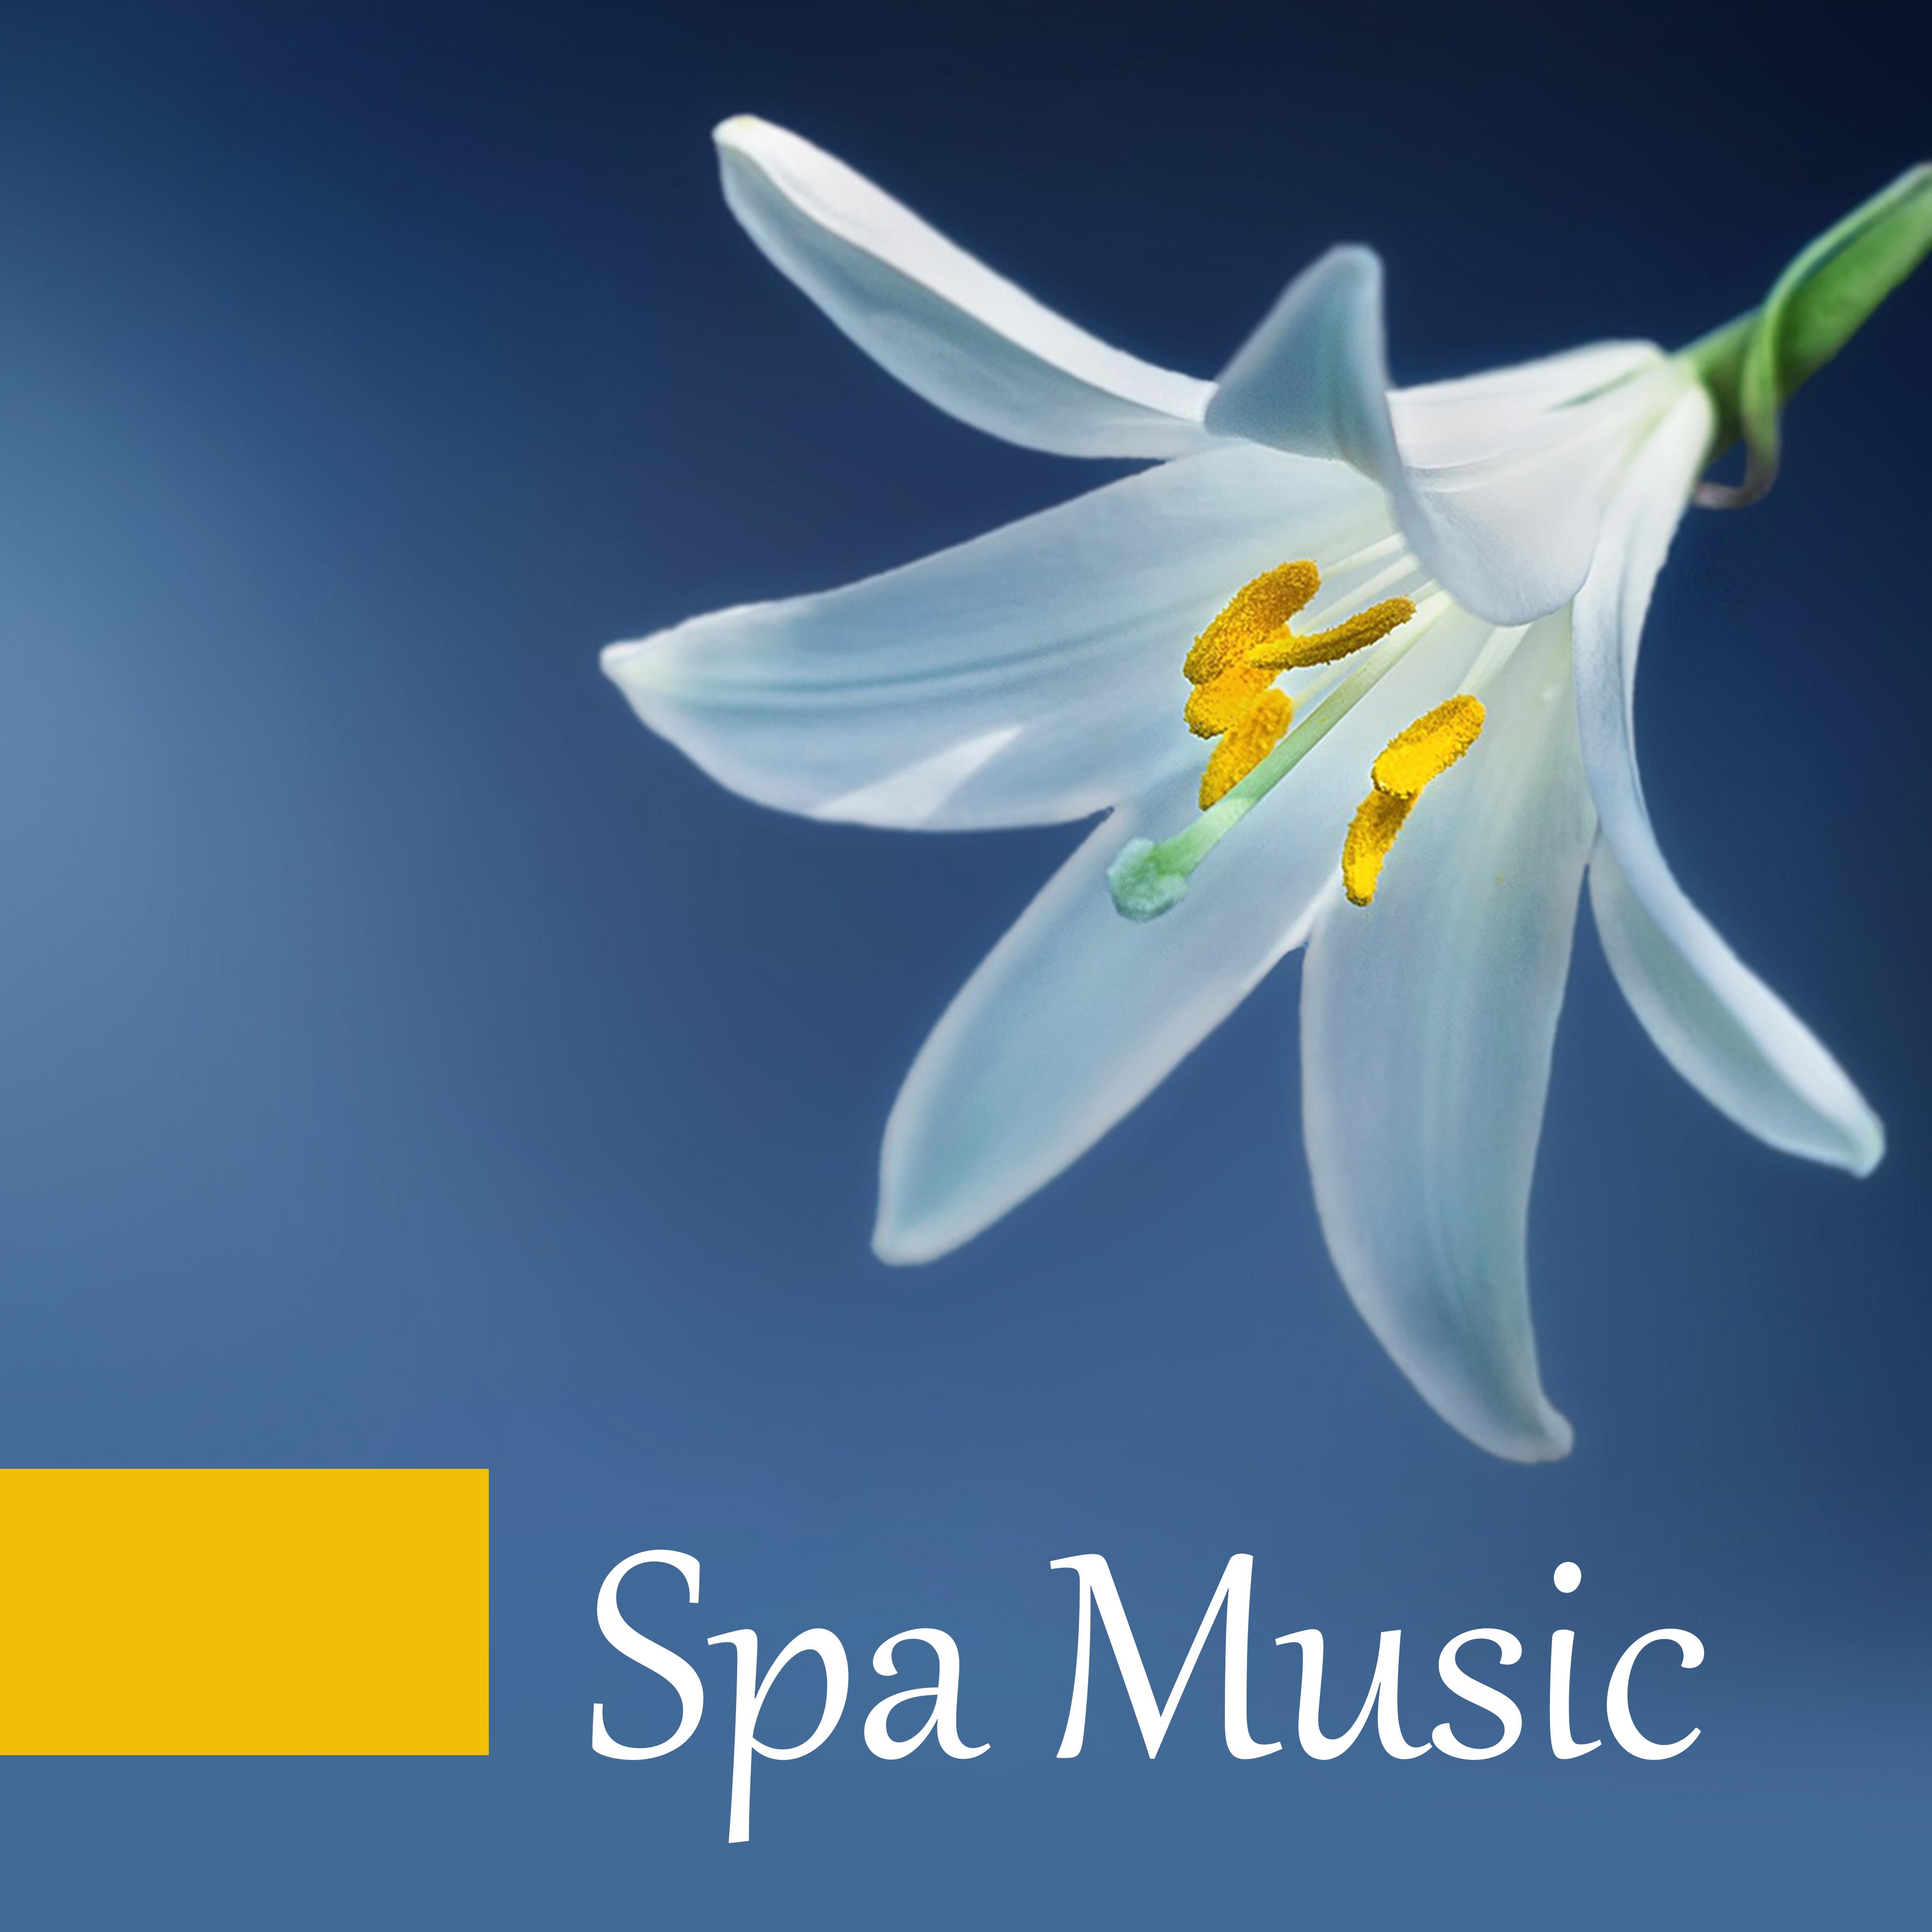 Spa Music  Pure Massage, Relaxation  Wellness, Pure Sleep, Soft Music to Calm Down, Relaxing Waves, Calm Mind, Silence